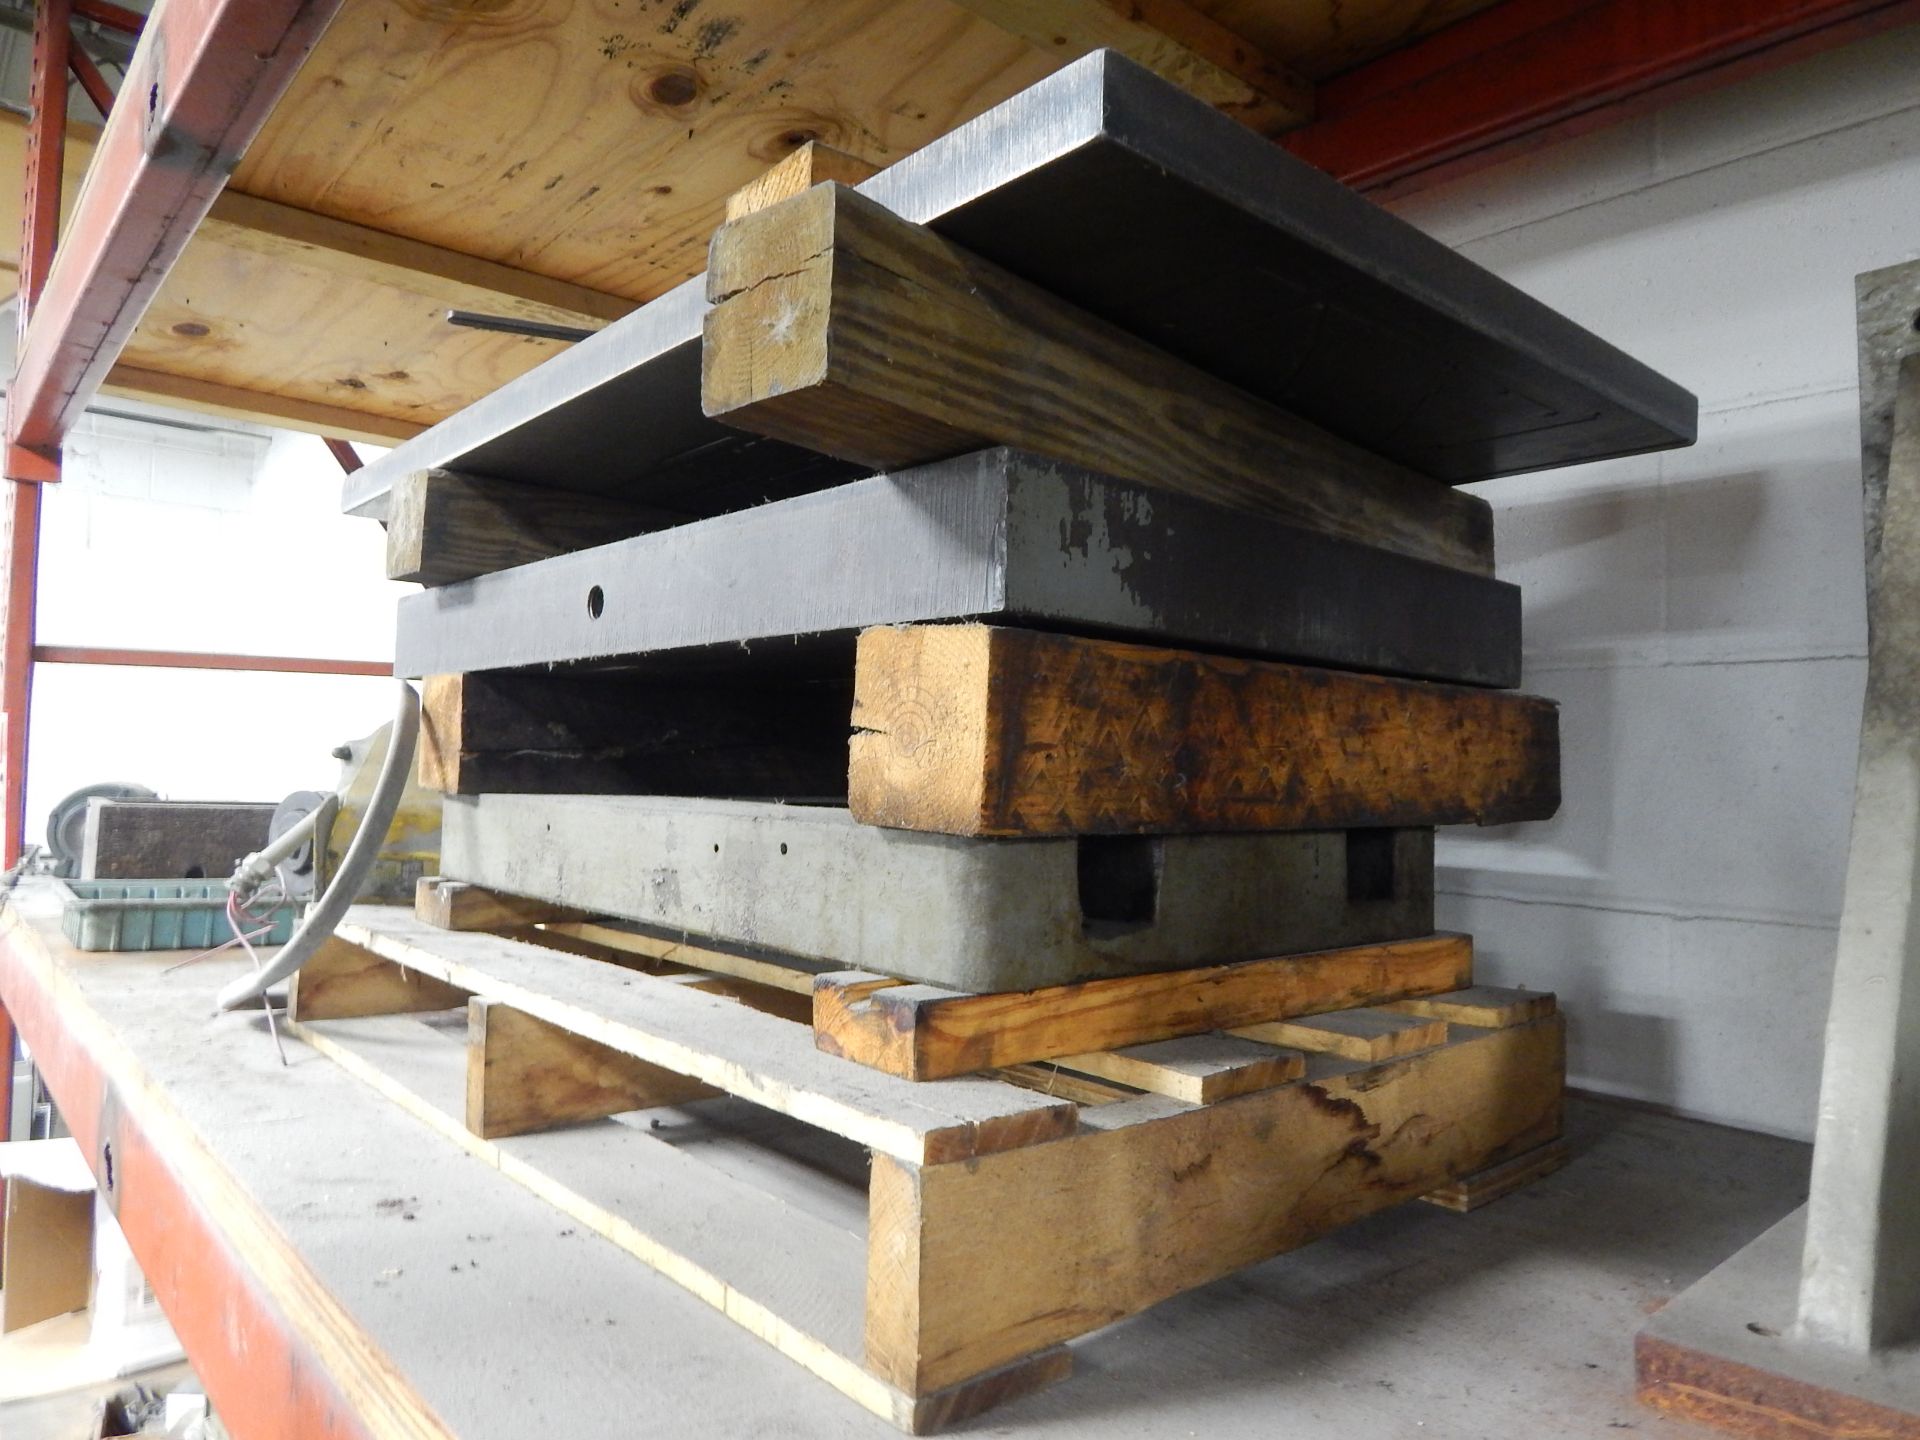 Pallet Shelving and Contents - Image 9 of 9